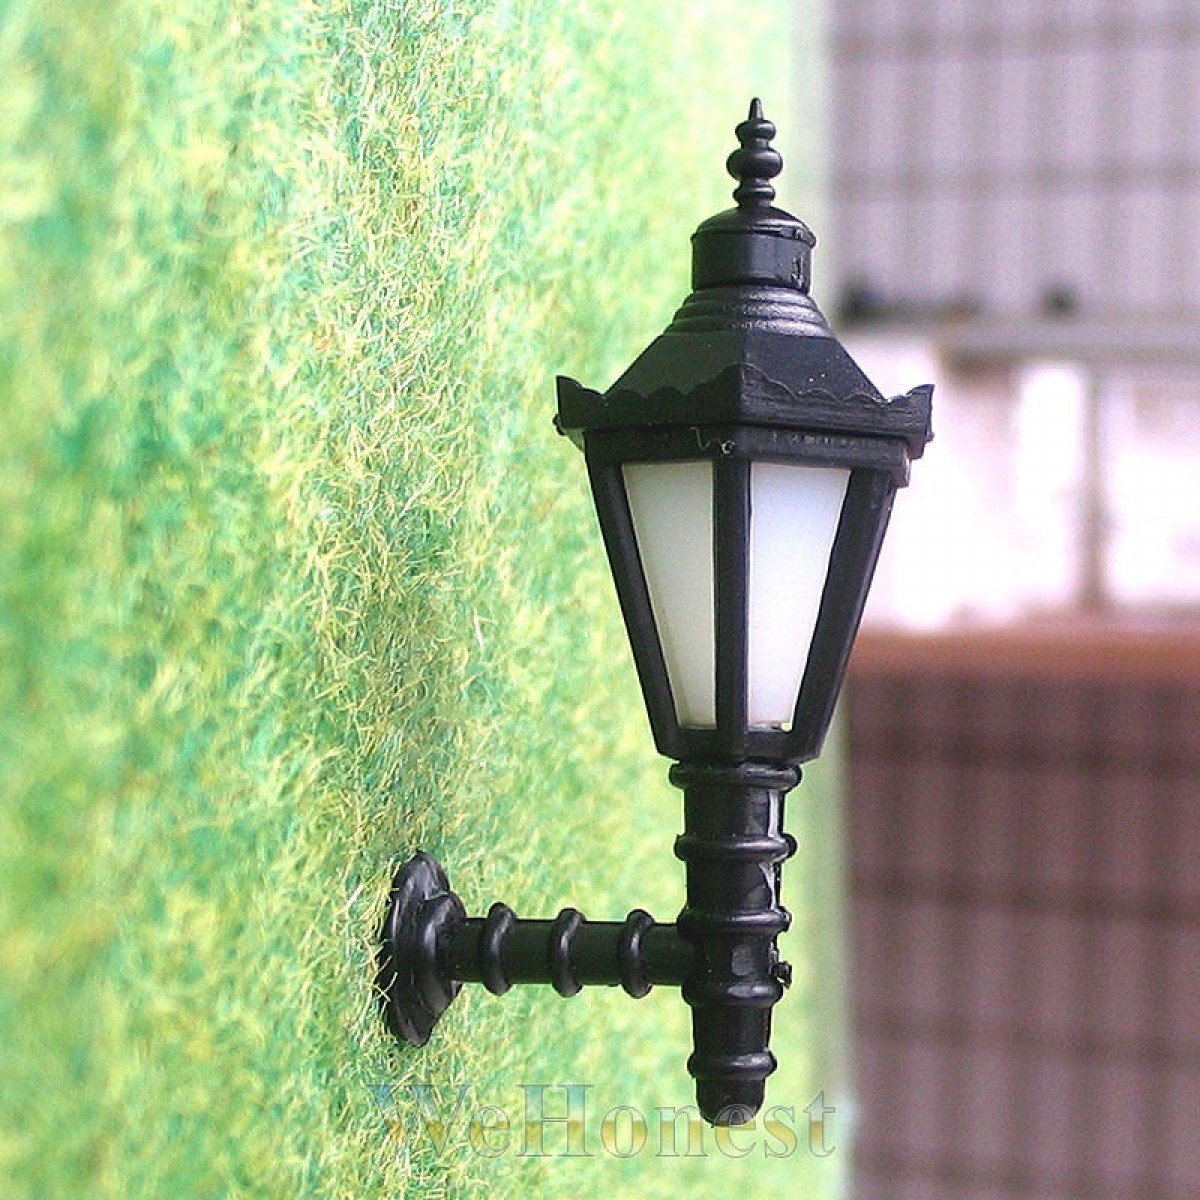        3 x O Scale Long Life Wall Lampposts LEDs Made #BD1 (WeHonest)